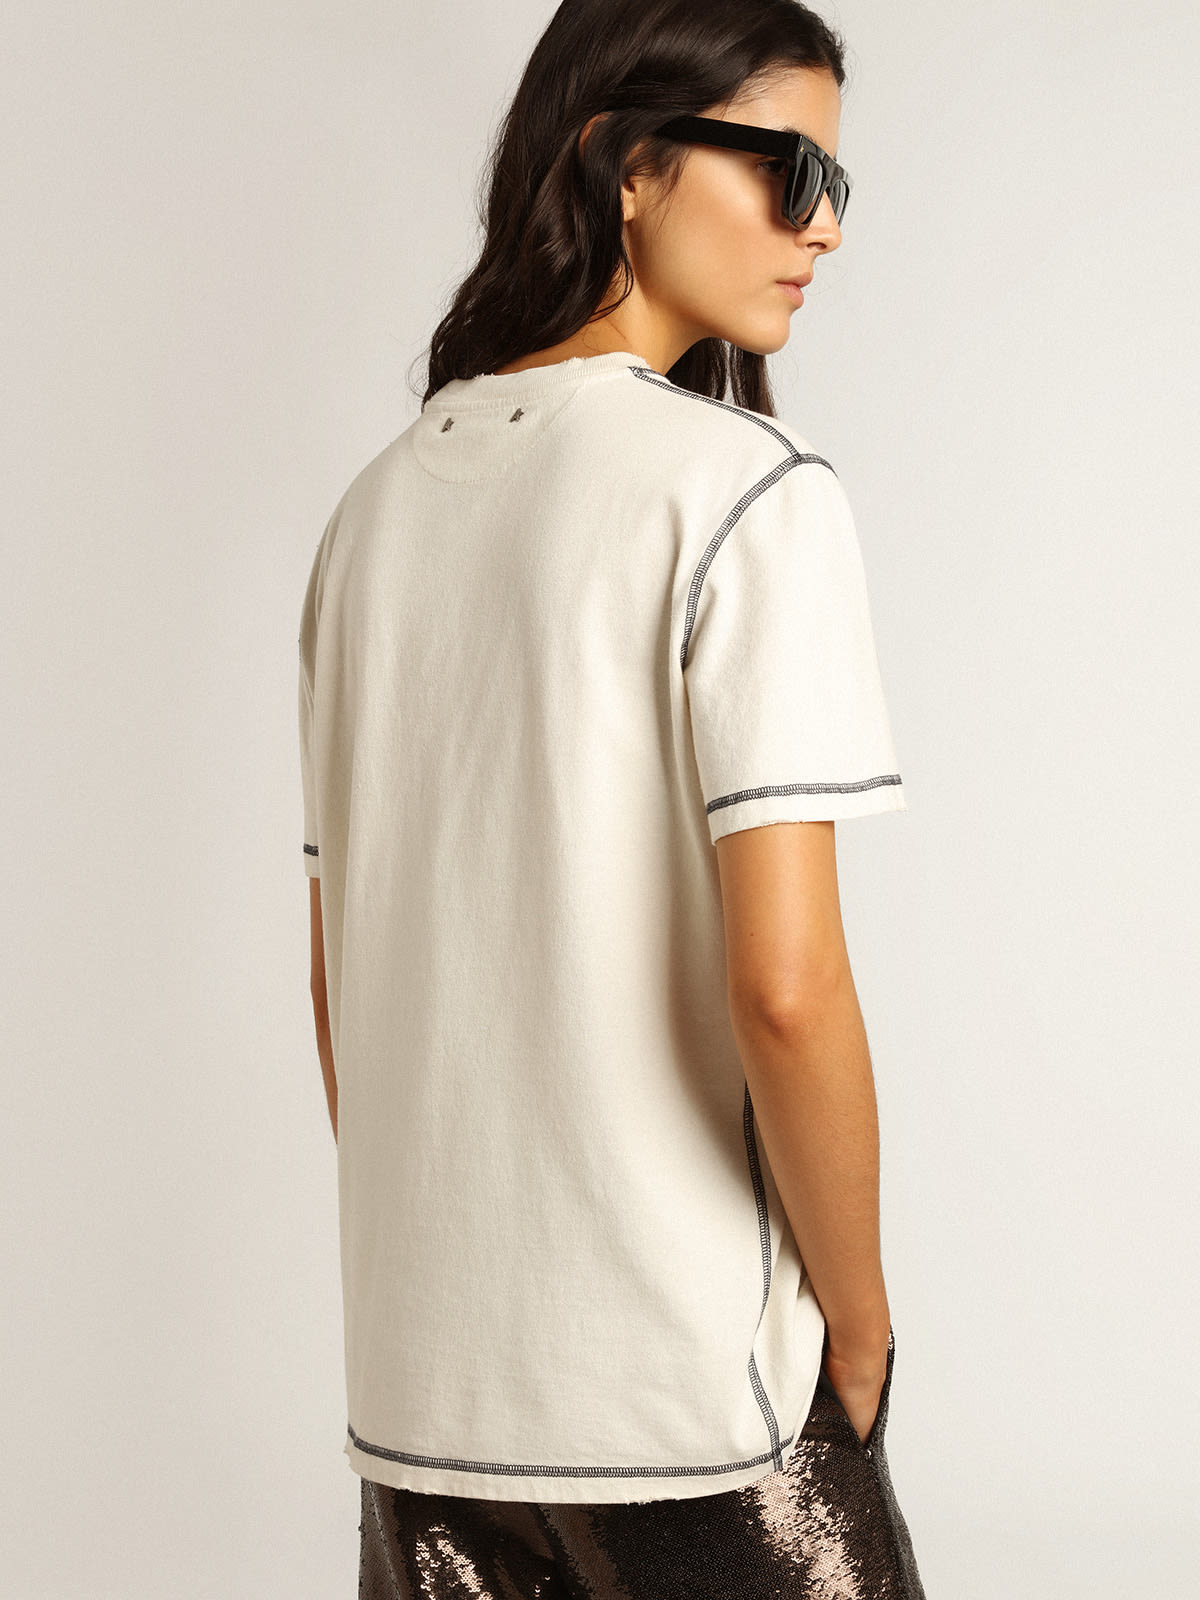 Golden Goose - White T-shirt with blue embroidered lettering in 